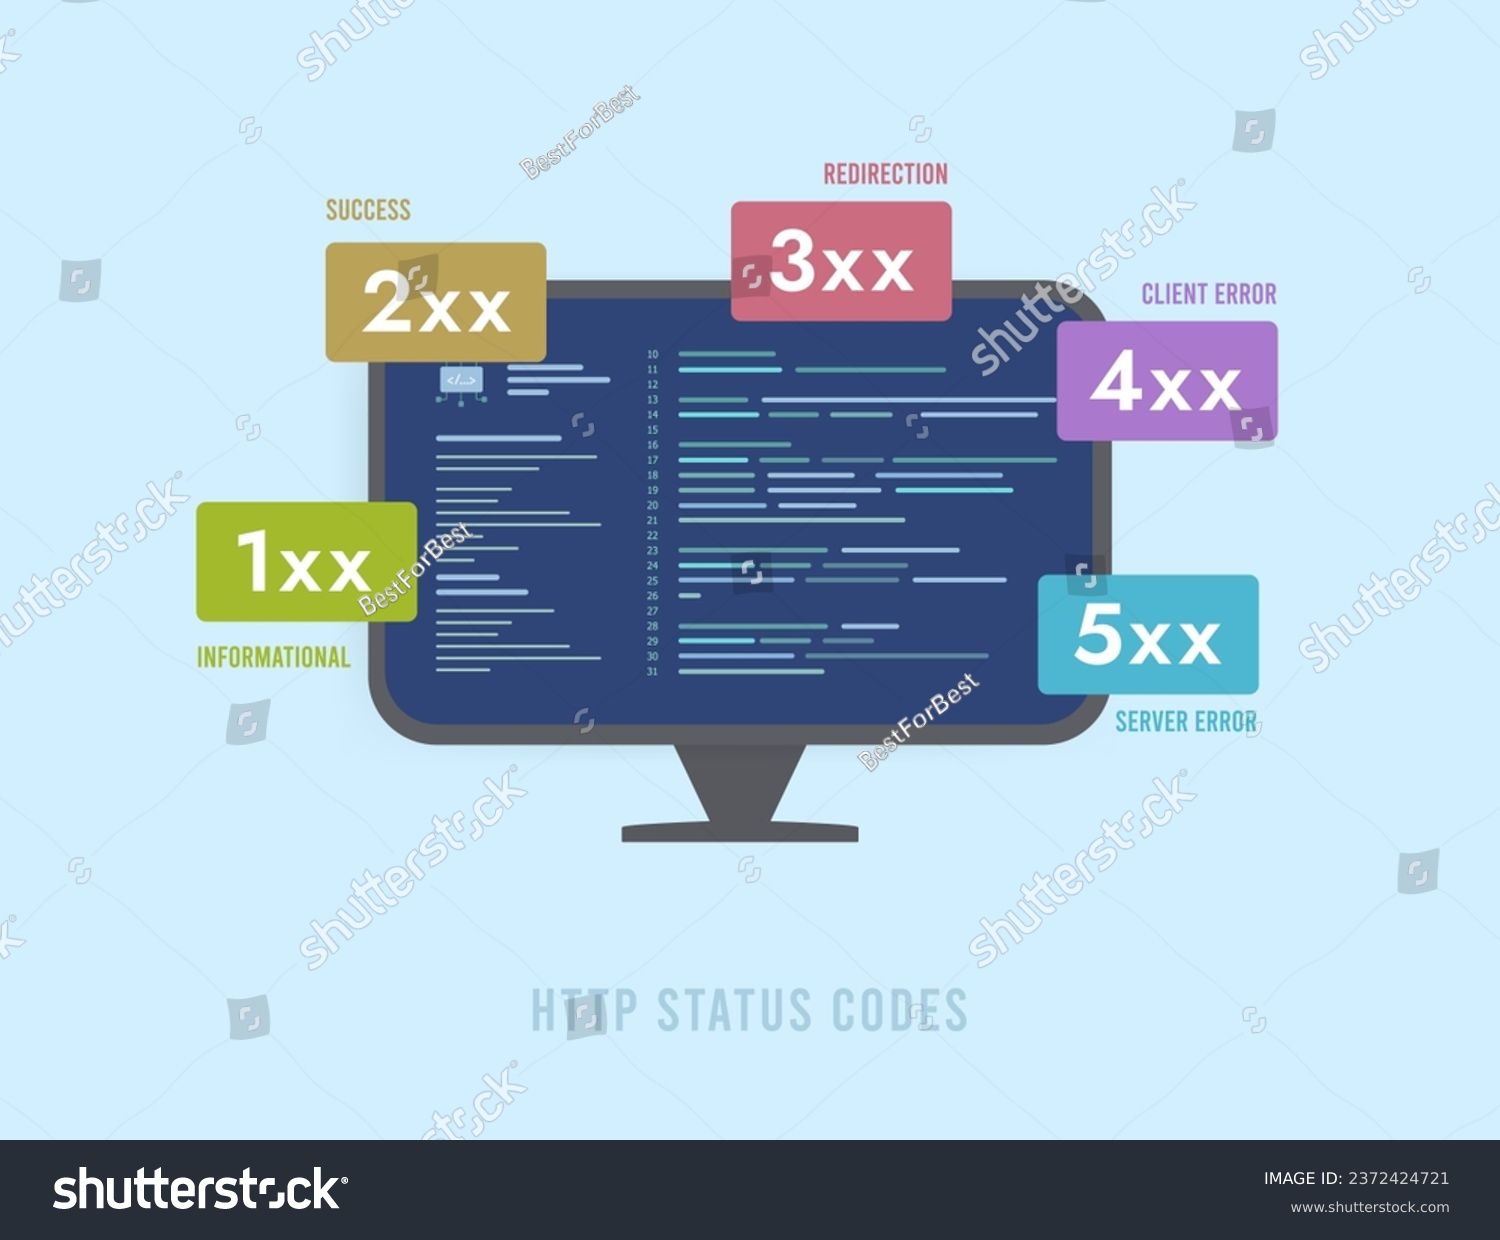 SVG of HTTP Status Codes - Important for Website Functionality and SEO. Informational, Successful, Redirect Responses, Client and Server errors. Vector isolated illustration on blue background with icons svg